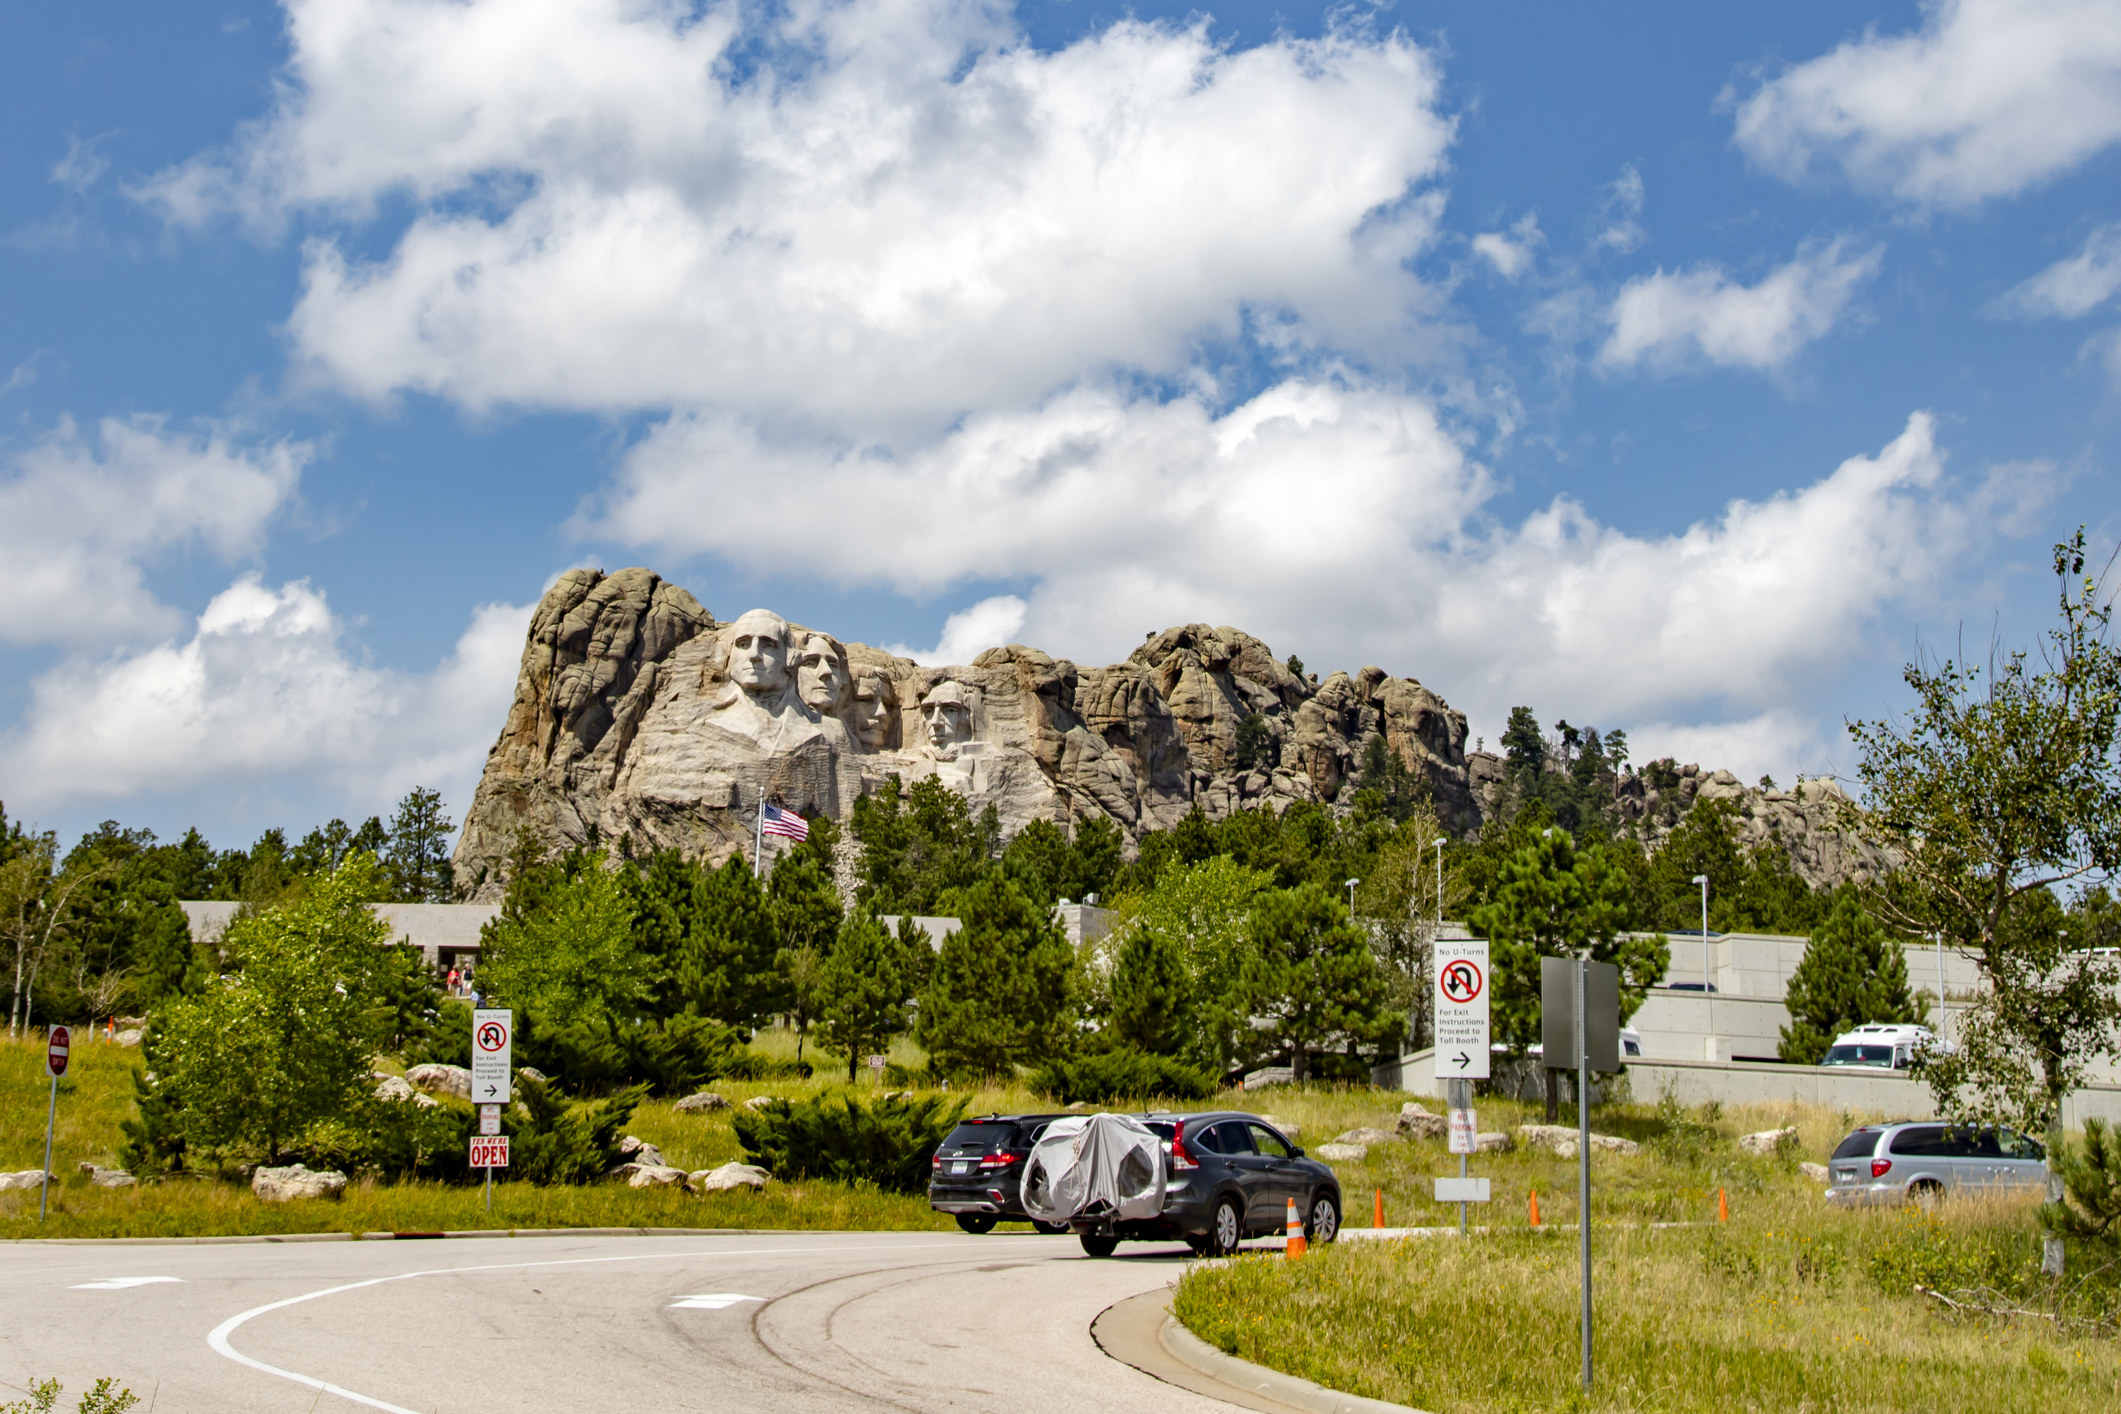 Mount Rushmore seen from the road